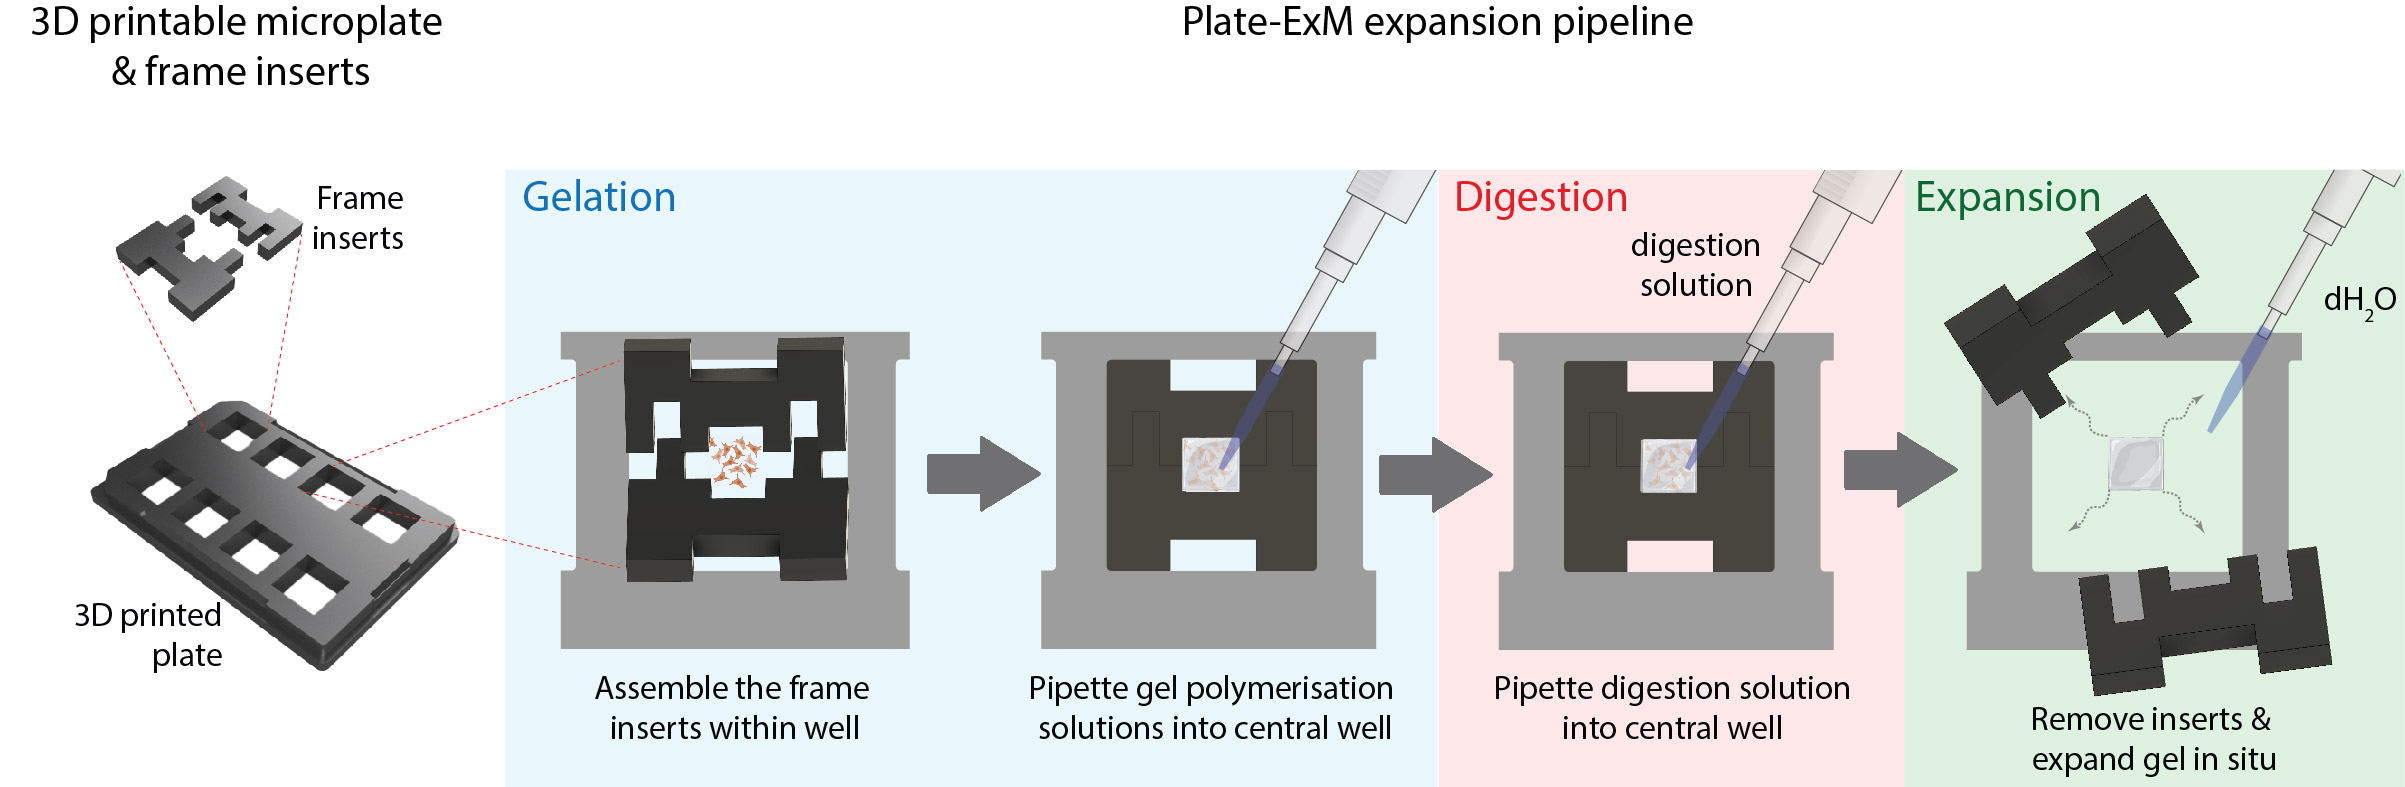 With the 3D printed microplate and laser cut frame inserts, we strive to do ExM in situ, without any need for transferring or manipulating the gel directly.